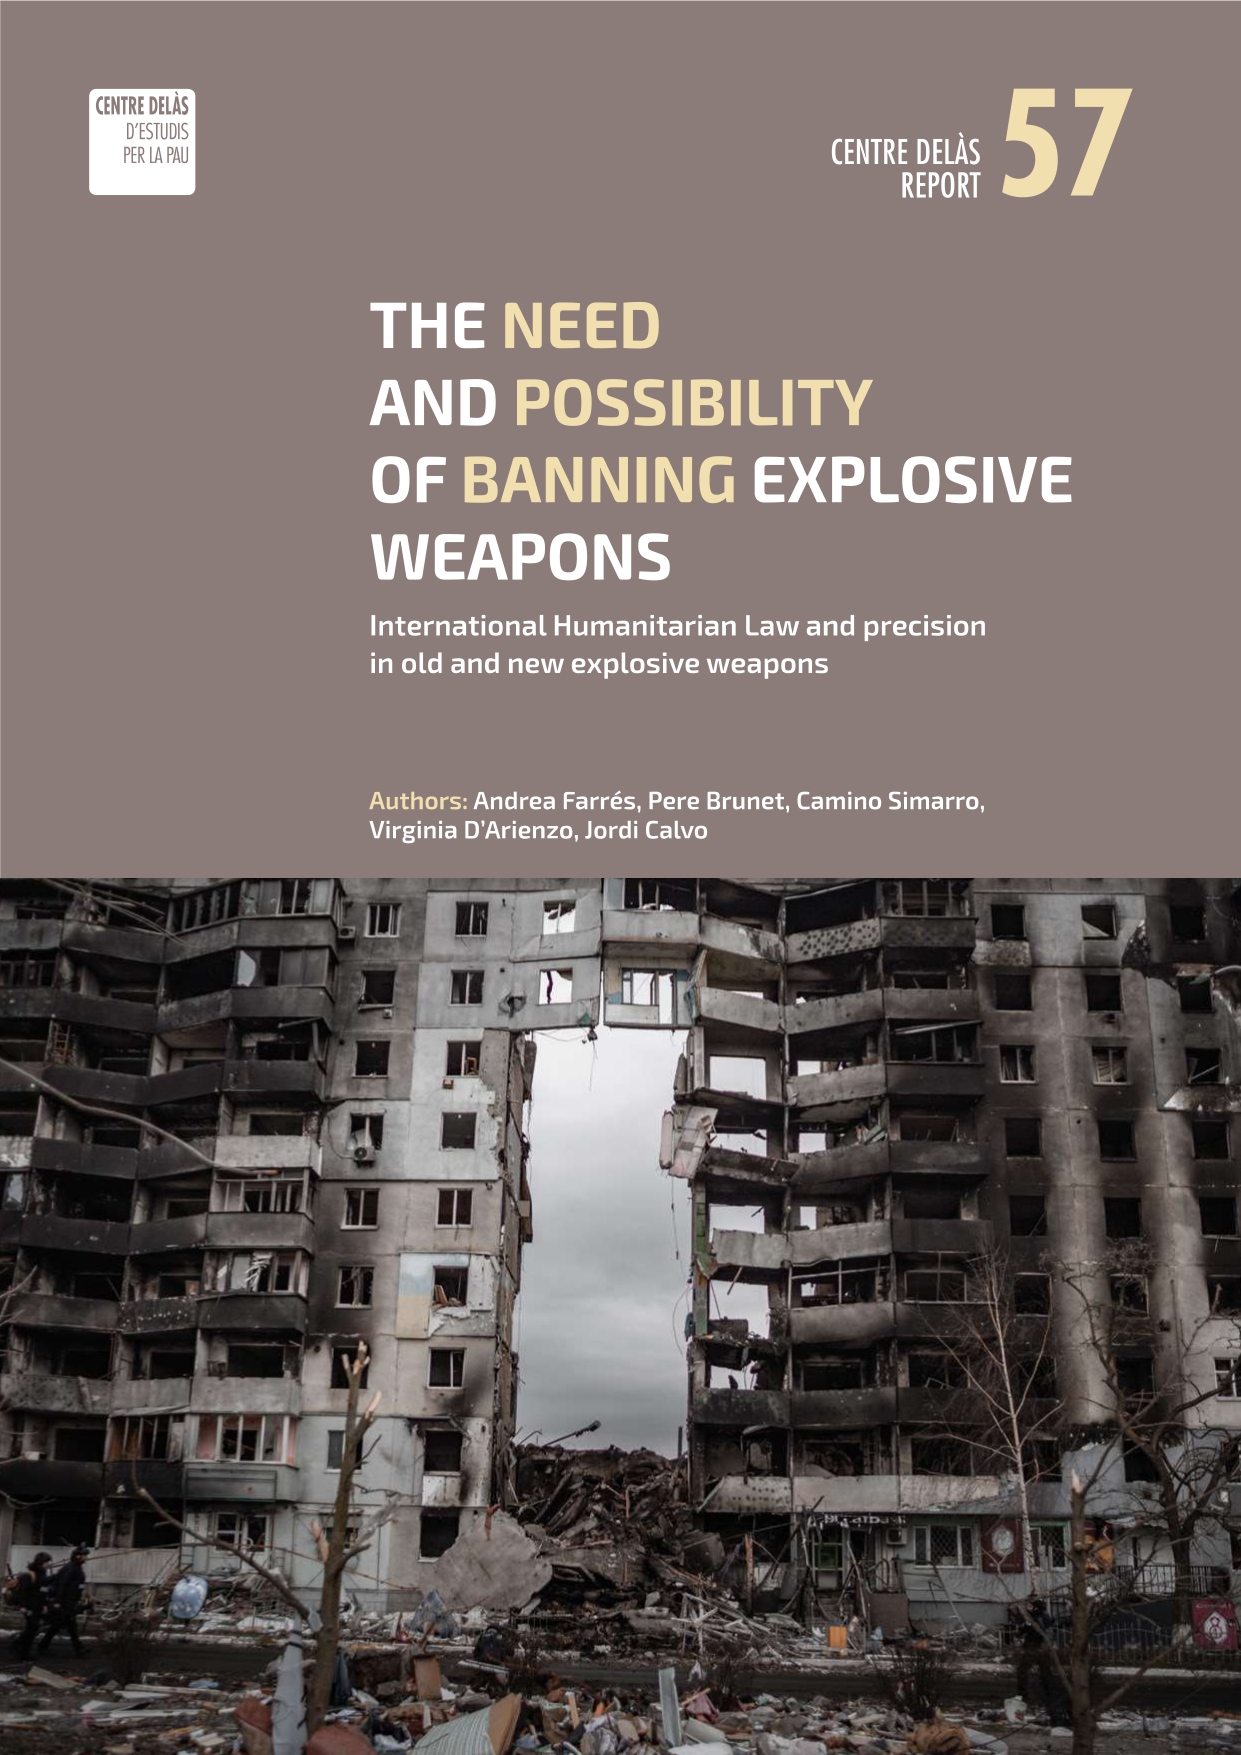 Report 57: “The need and possibility of banning explosive weapons. International Humanitarian Law and precision in old and new explosive weapons”